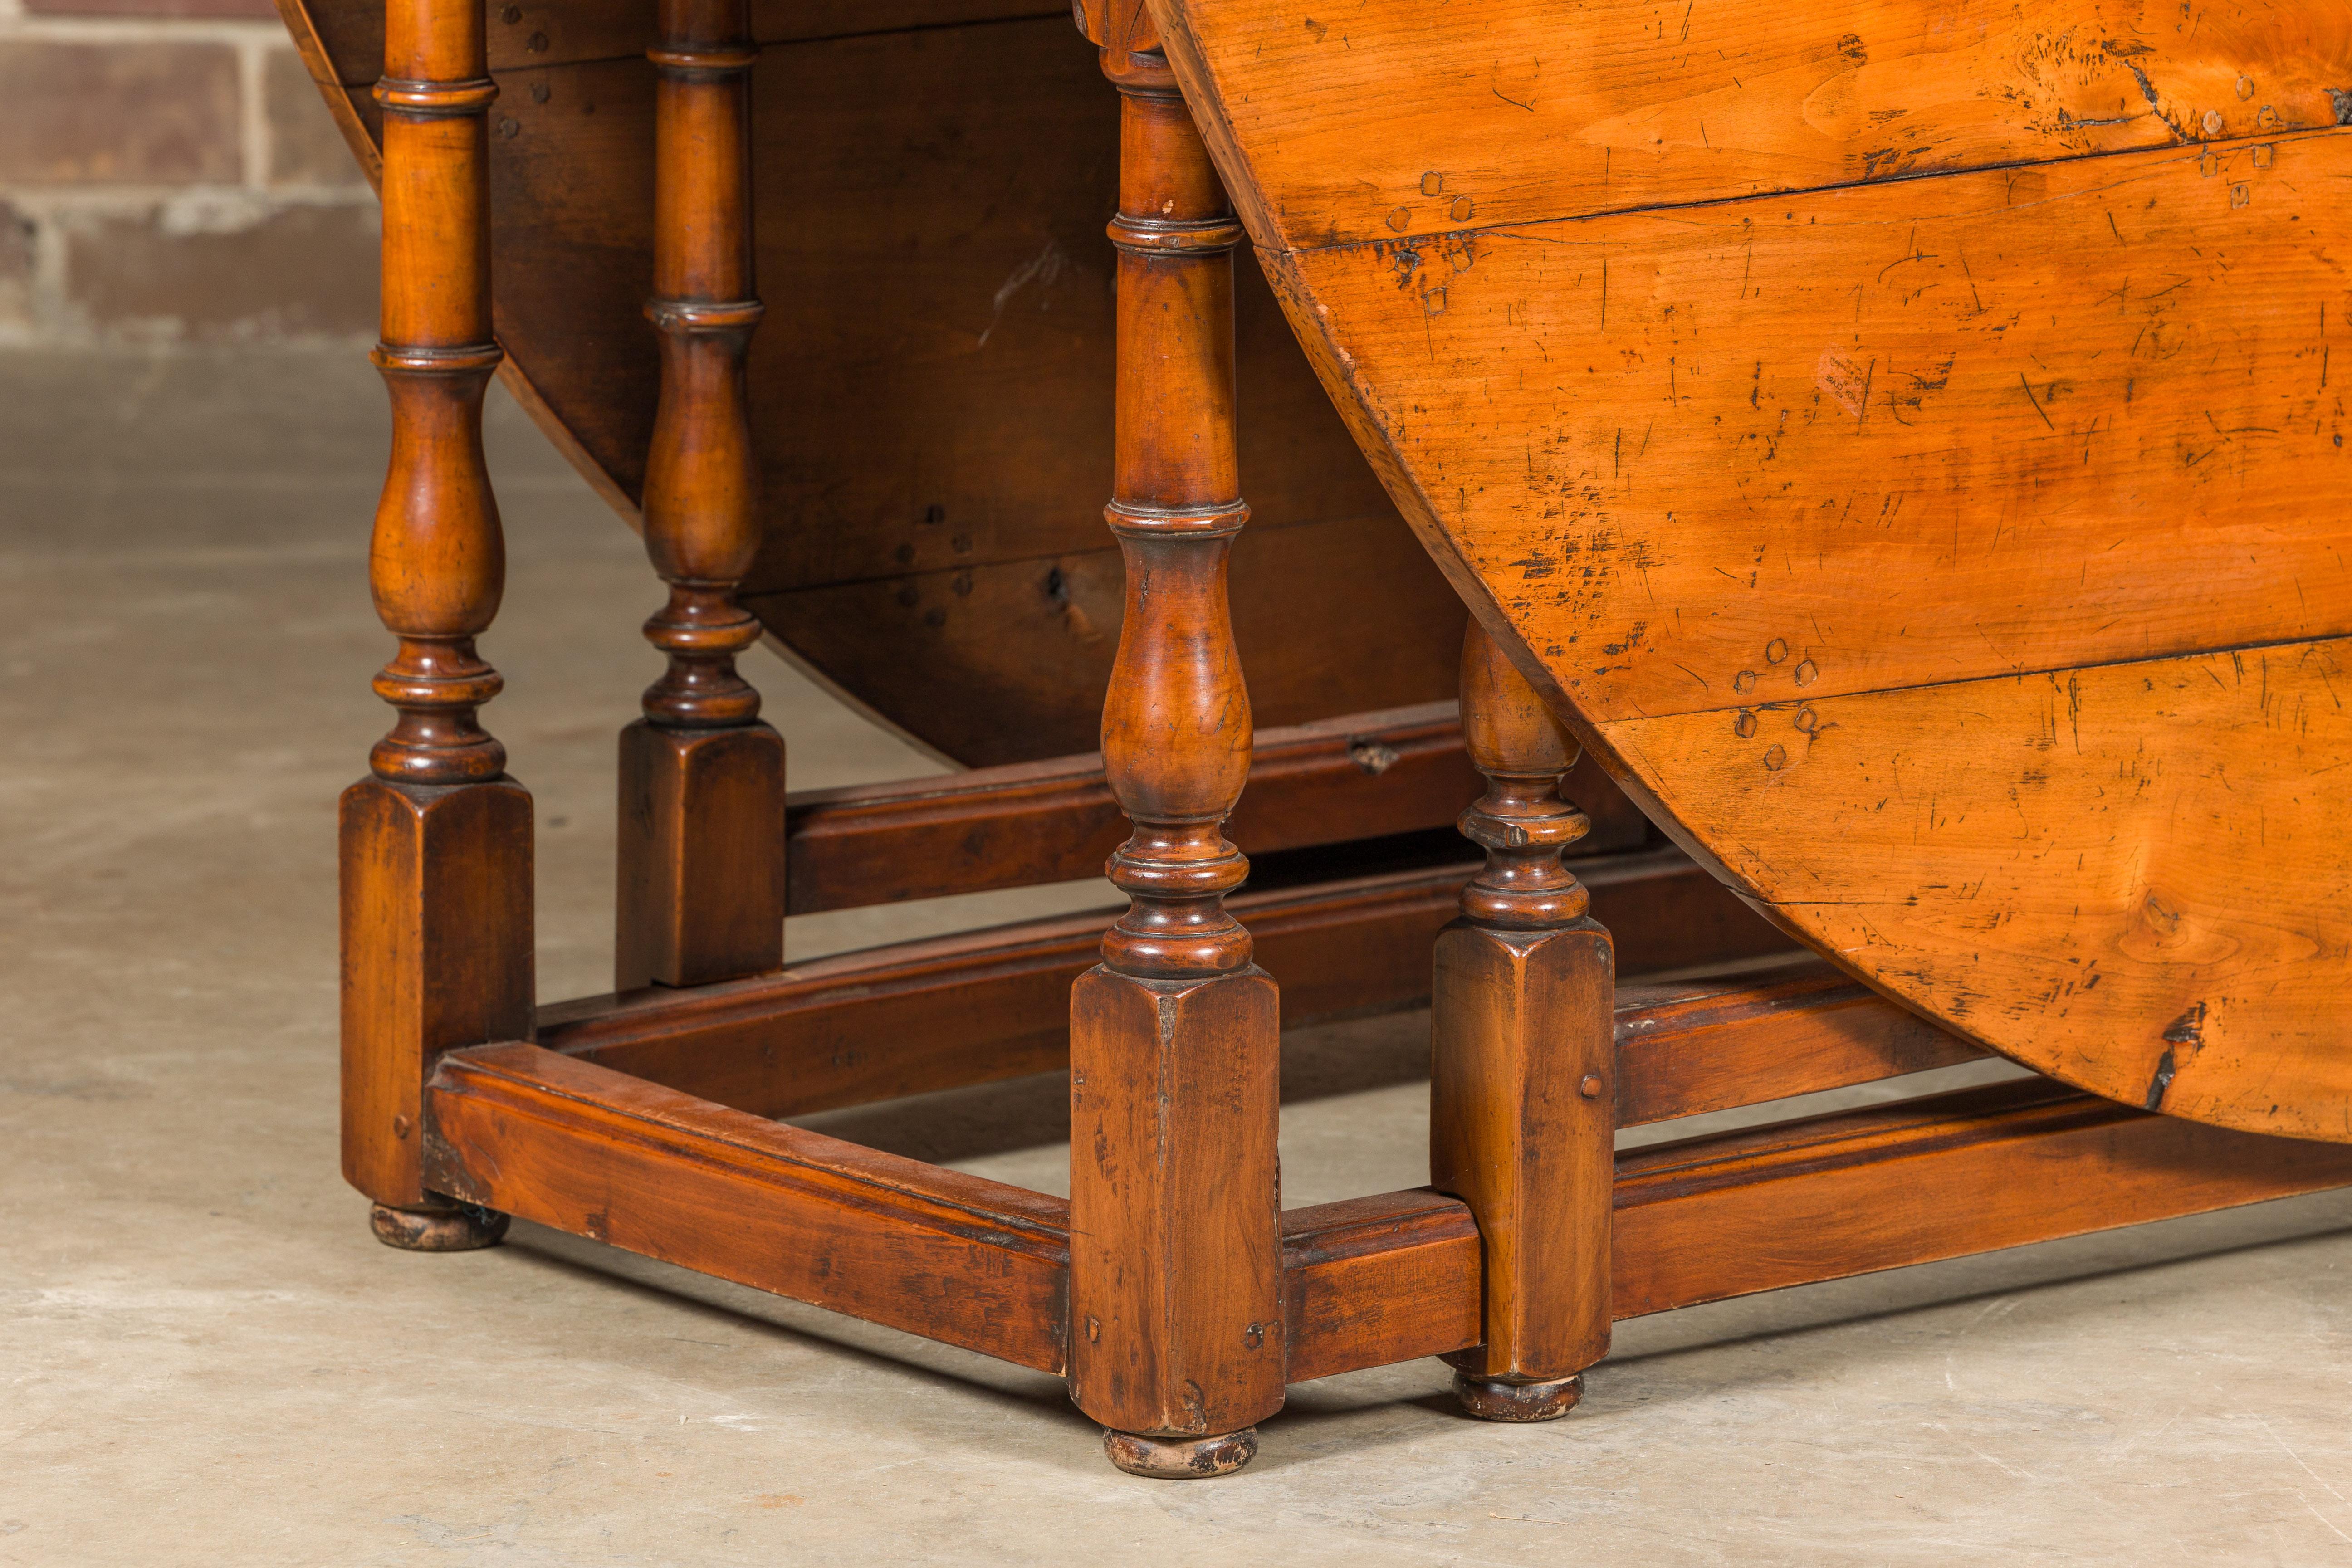 English 19th Century Pine Drop-Leaf Table with Oval Top and Turned Legs For Sale 2